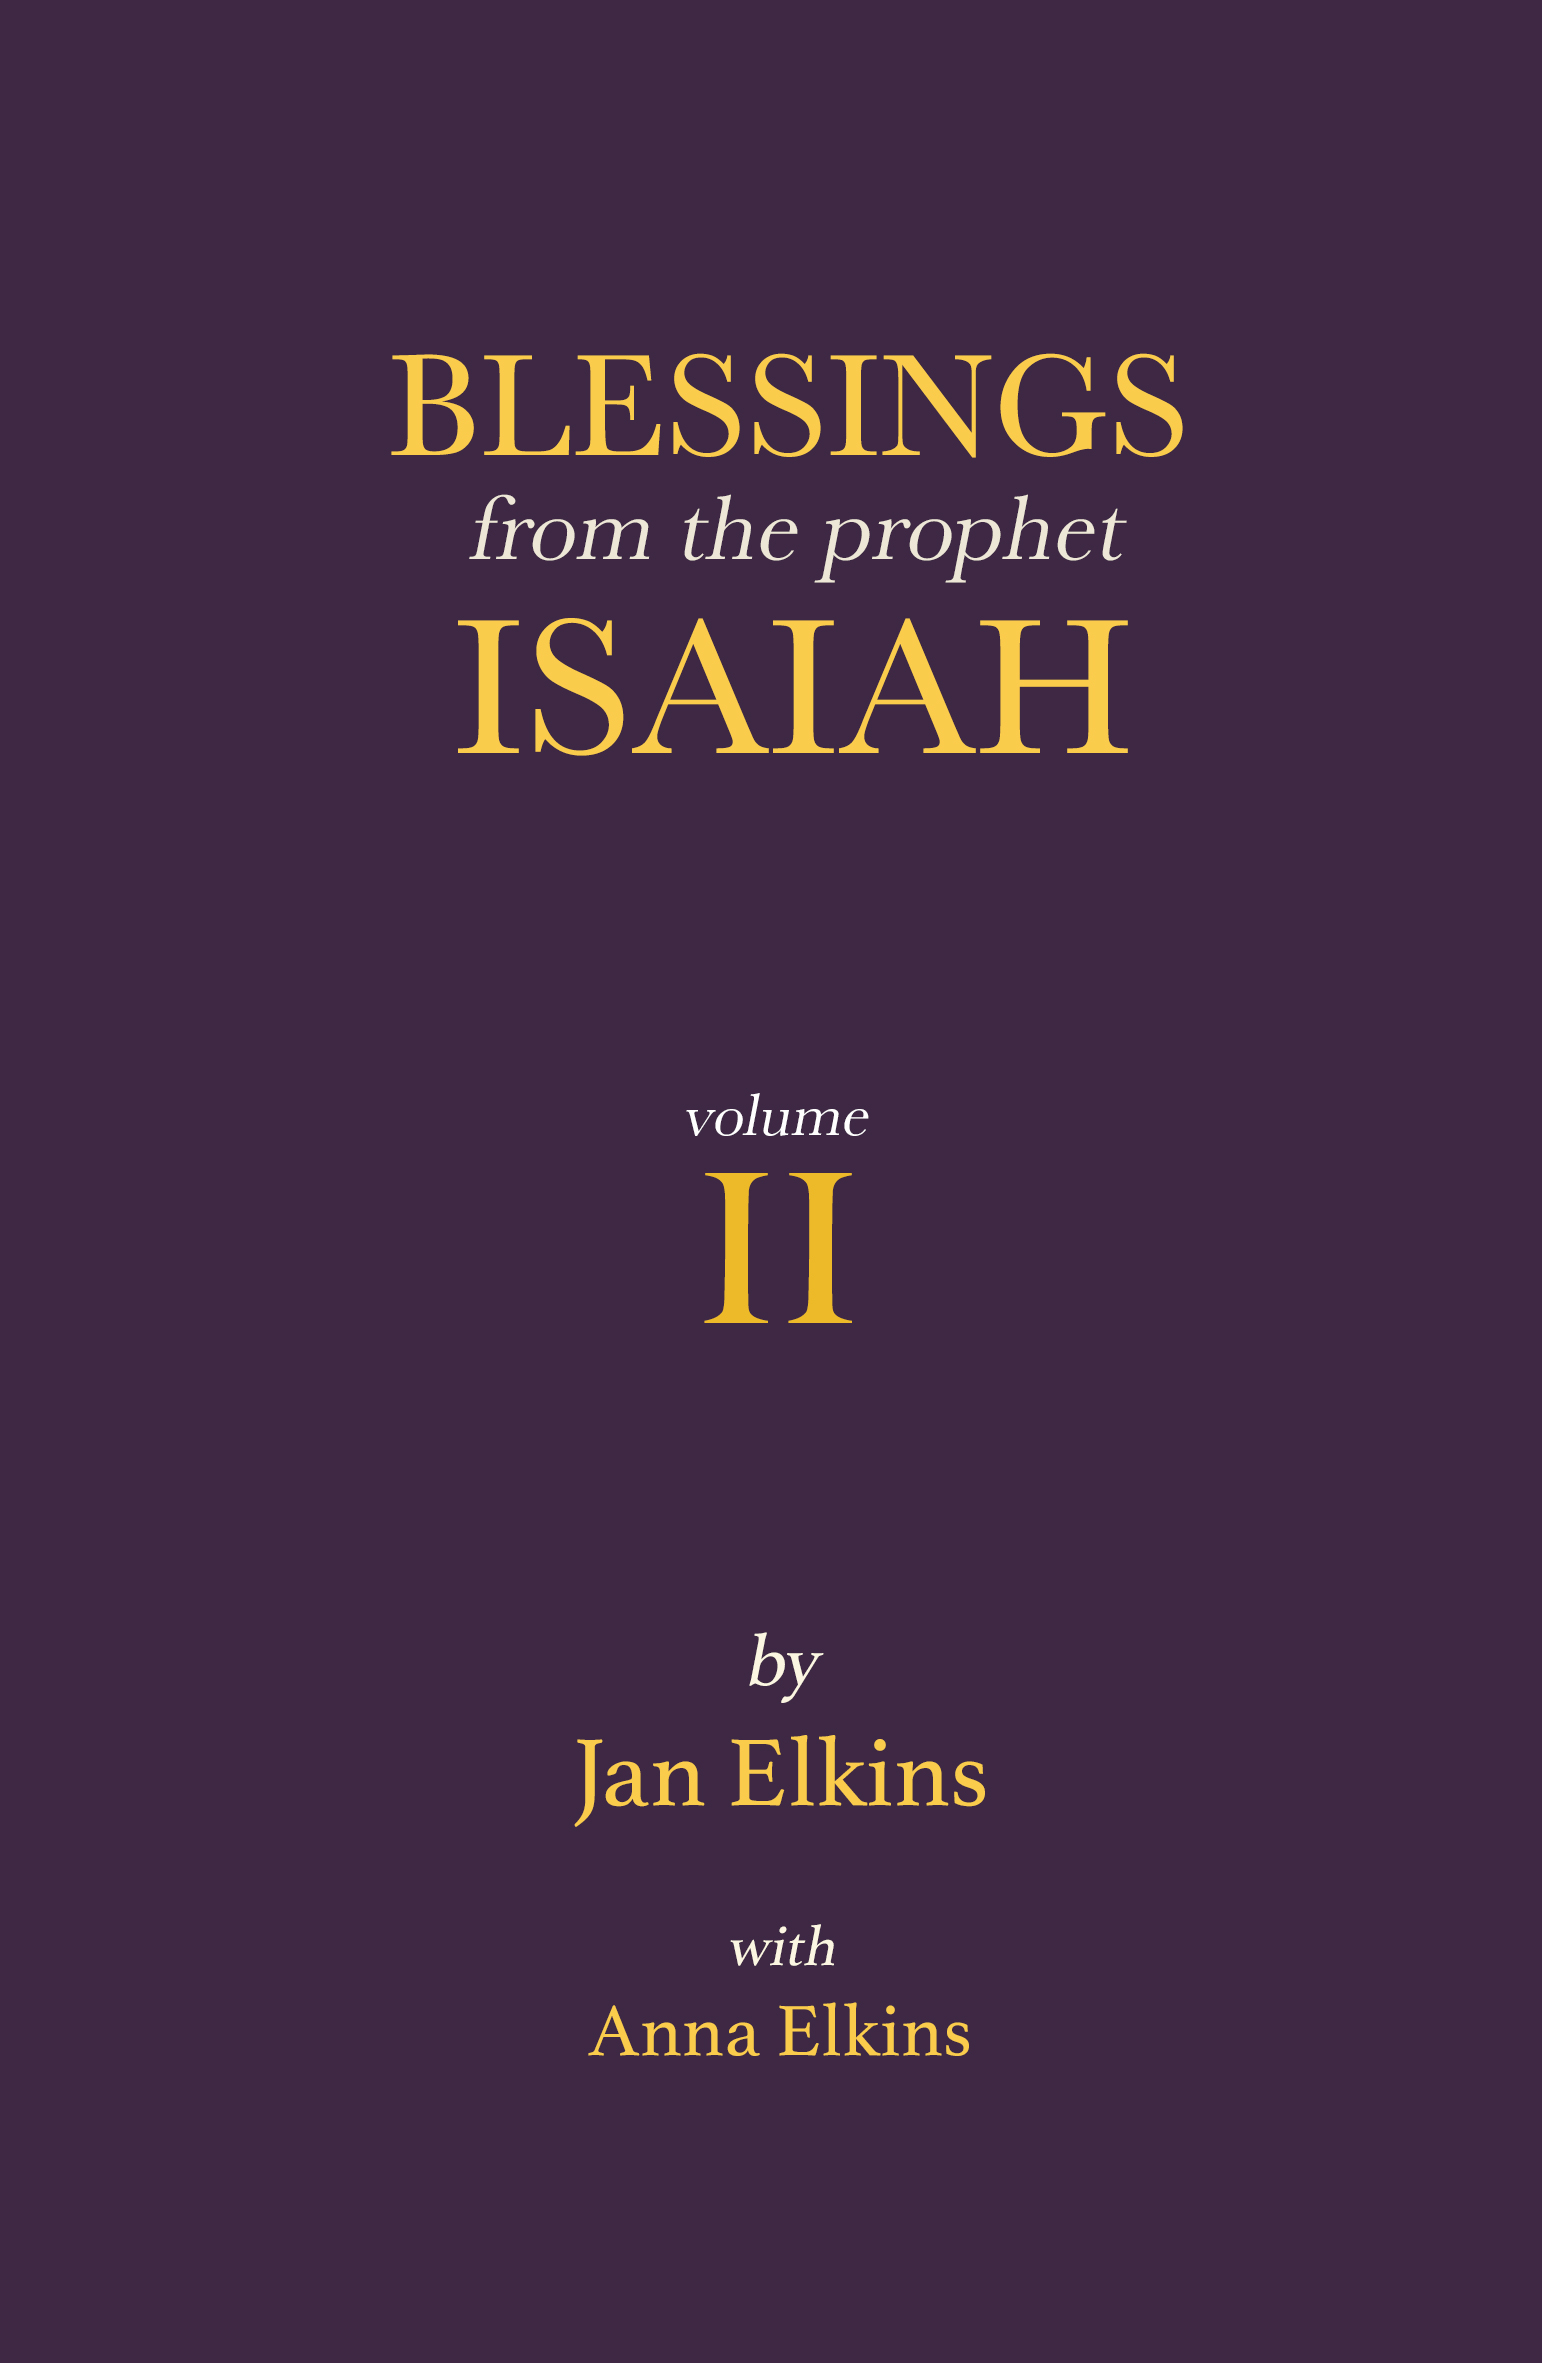 Blessings from the Prophet Isaiah Volume II - by Anna Elkins